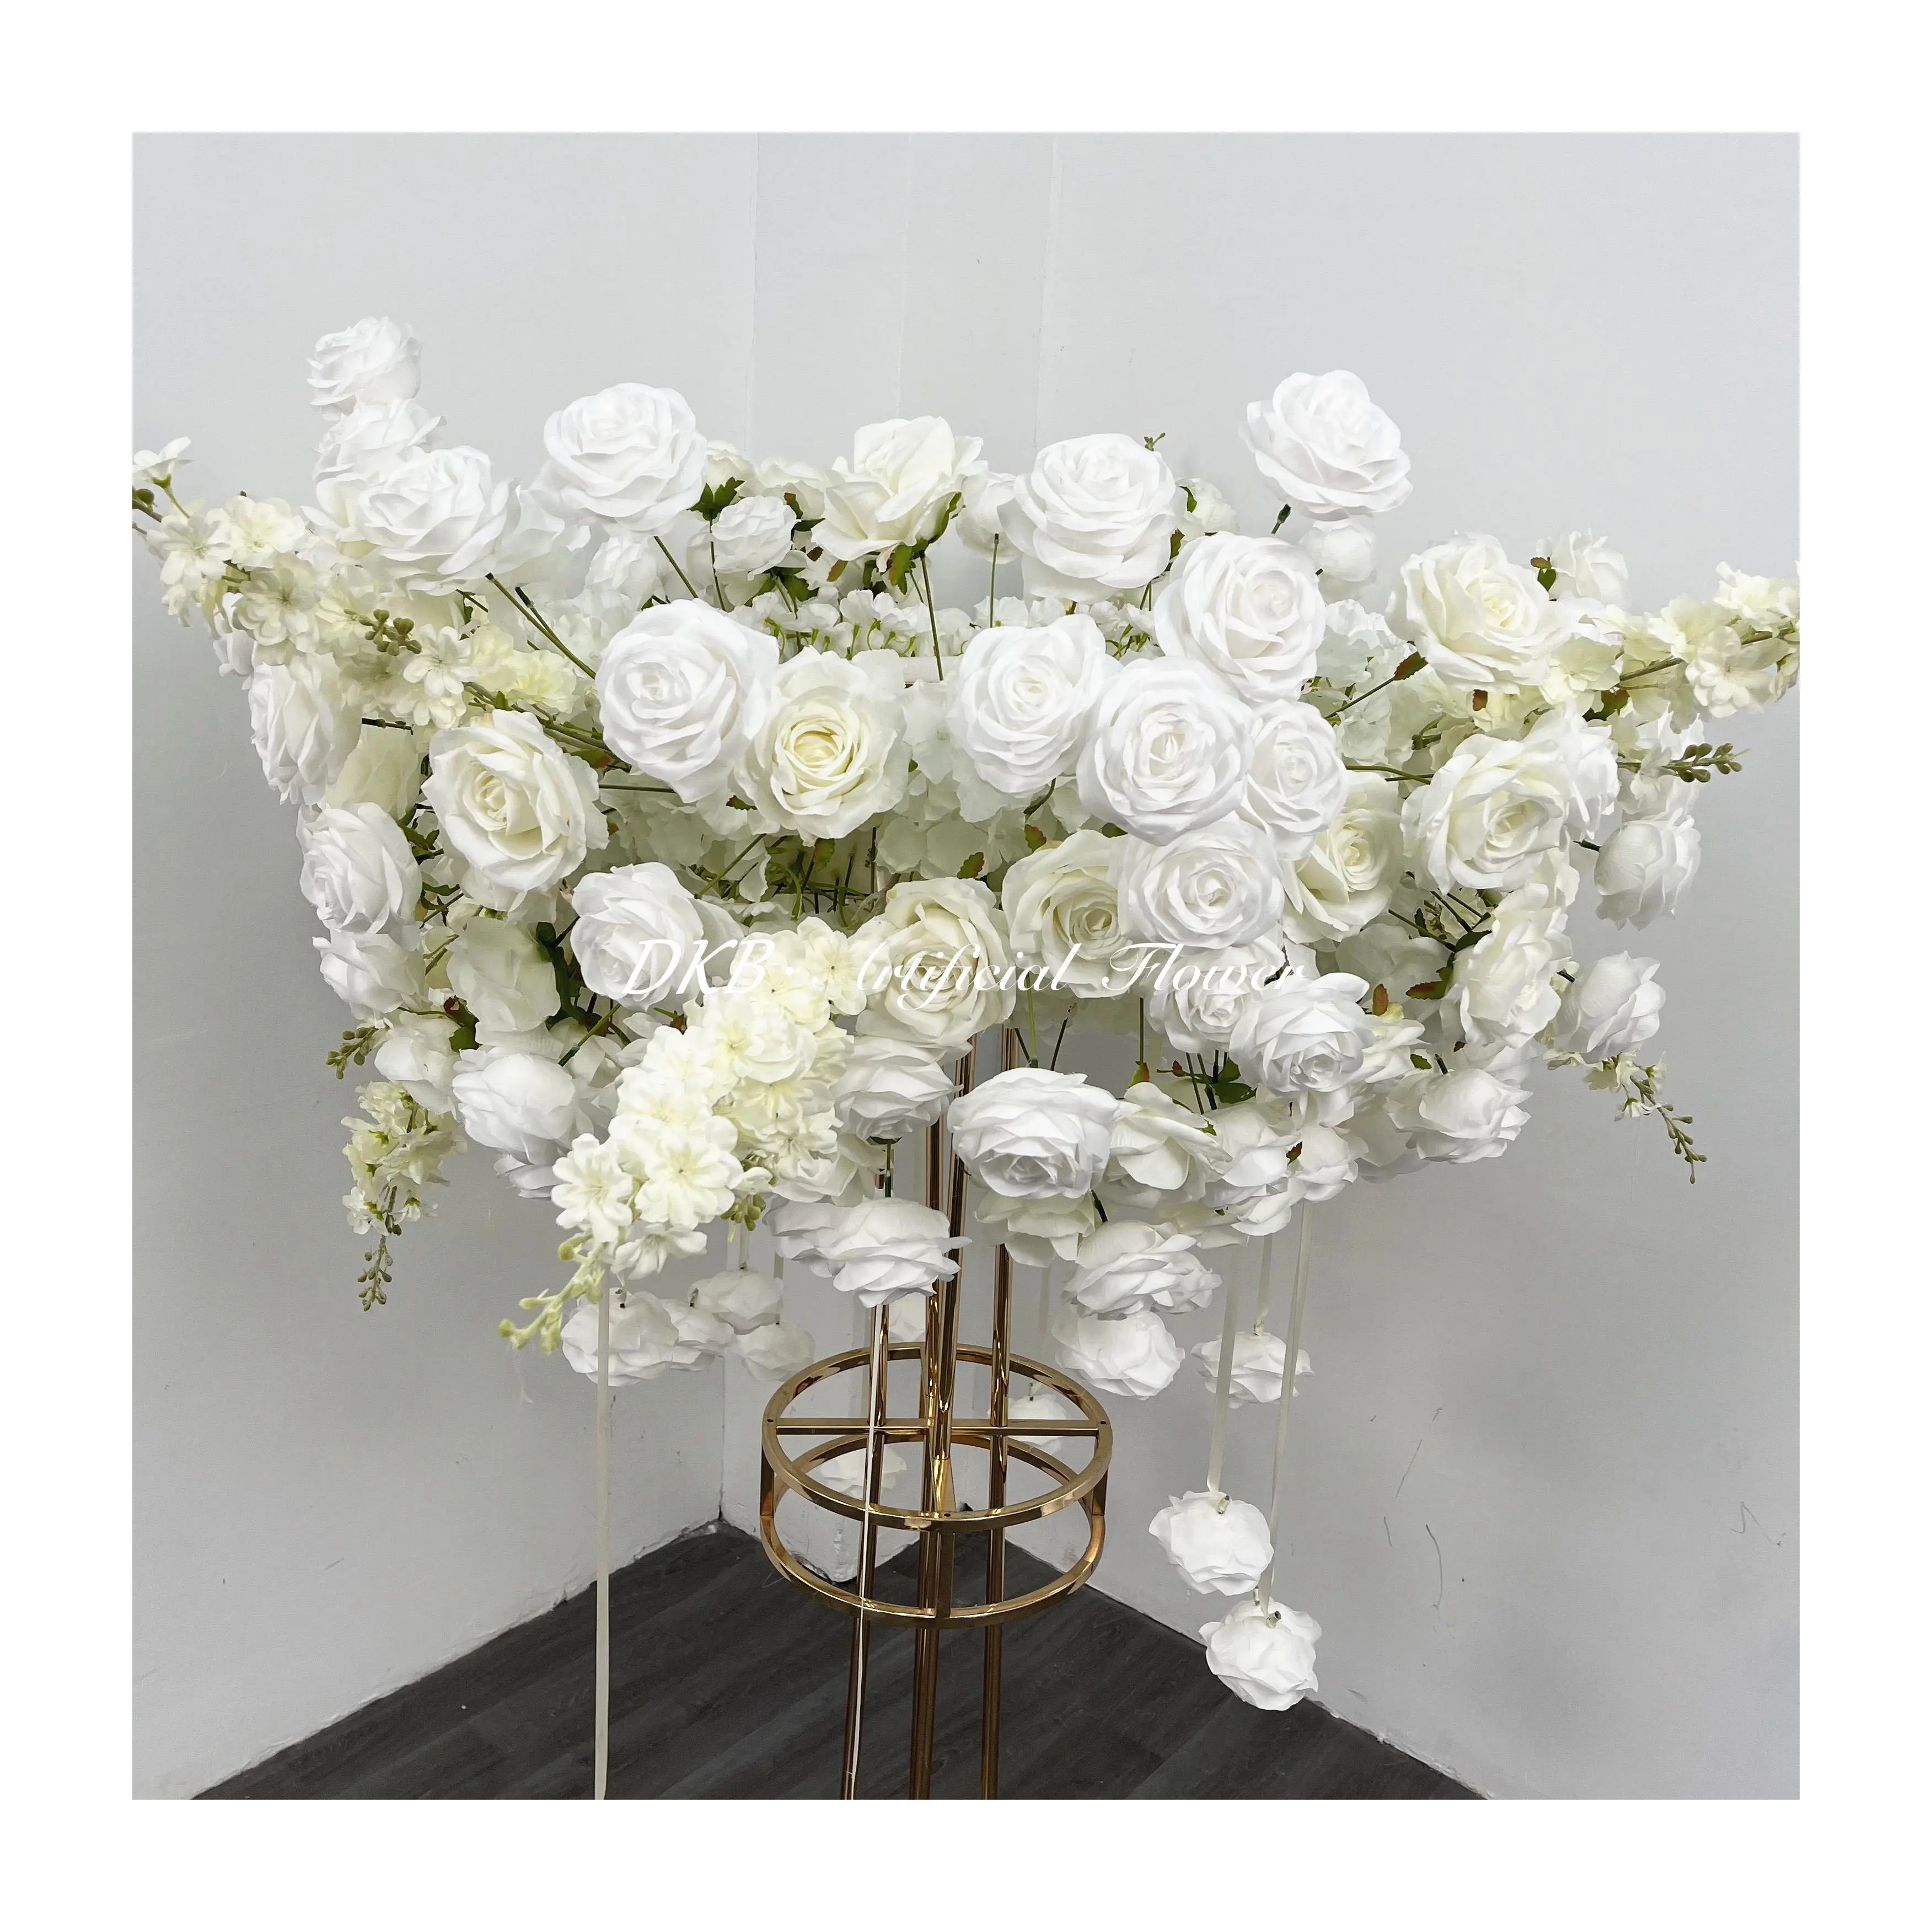 Low prices wholesale new Premium silk white rose high quality flower row delphinium table flowers runner for wedding